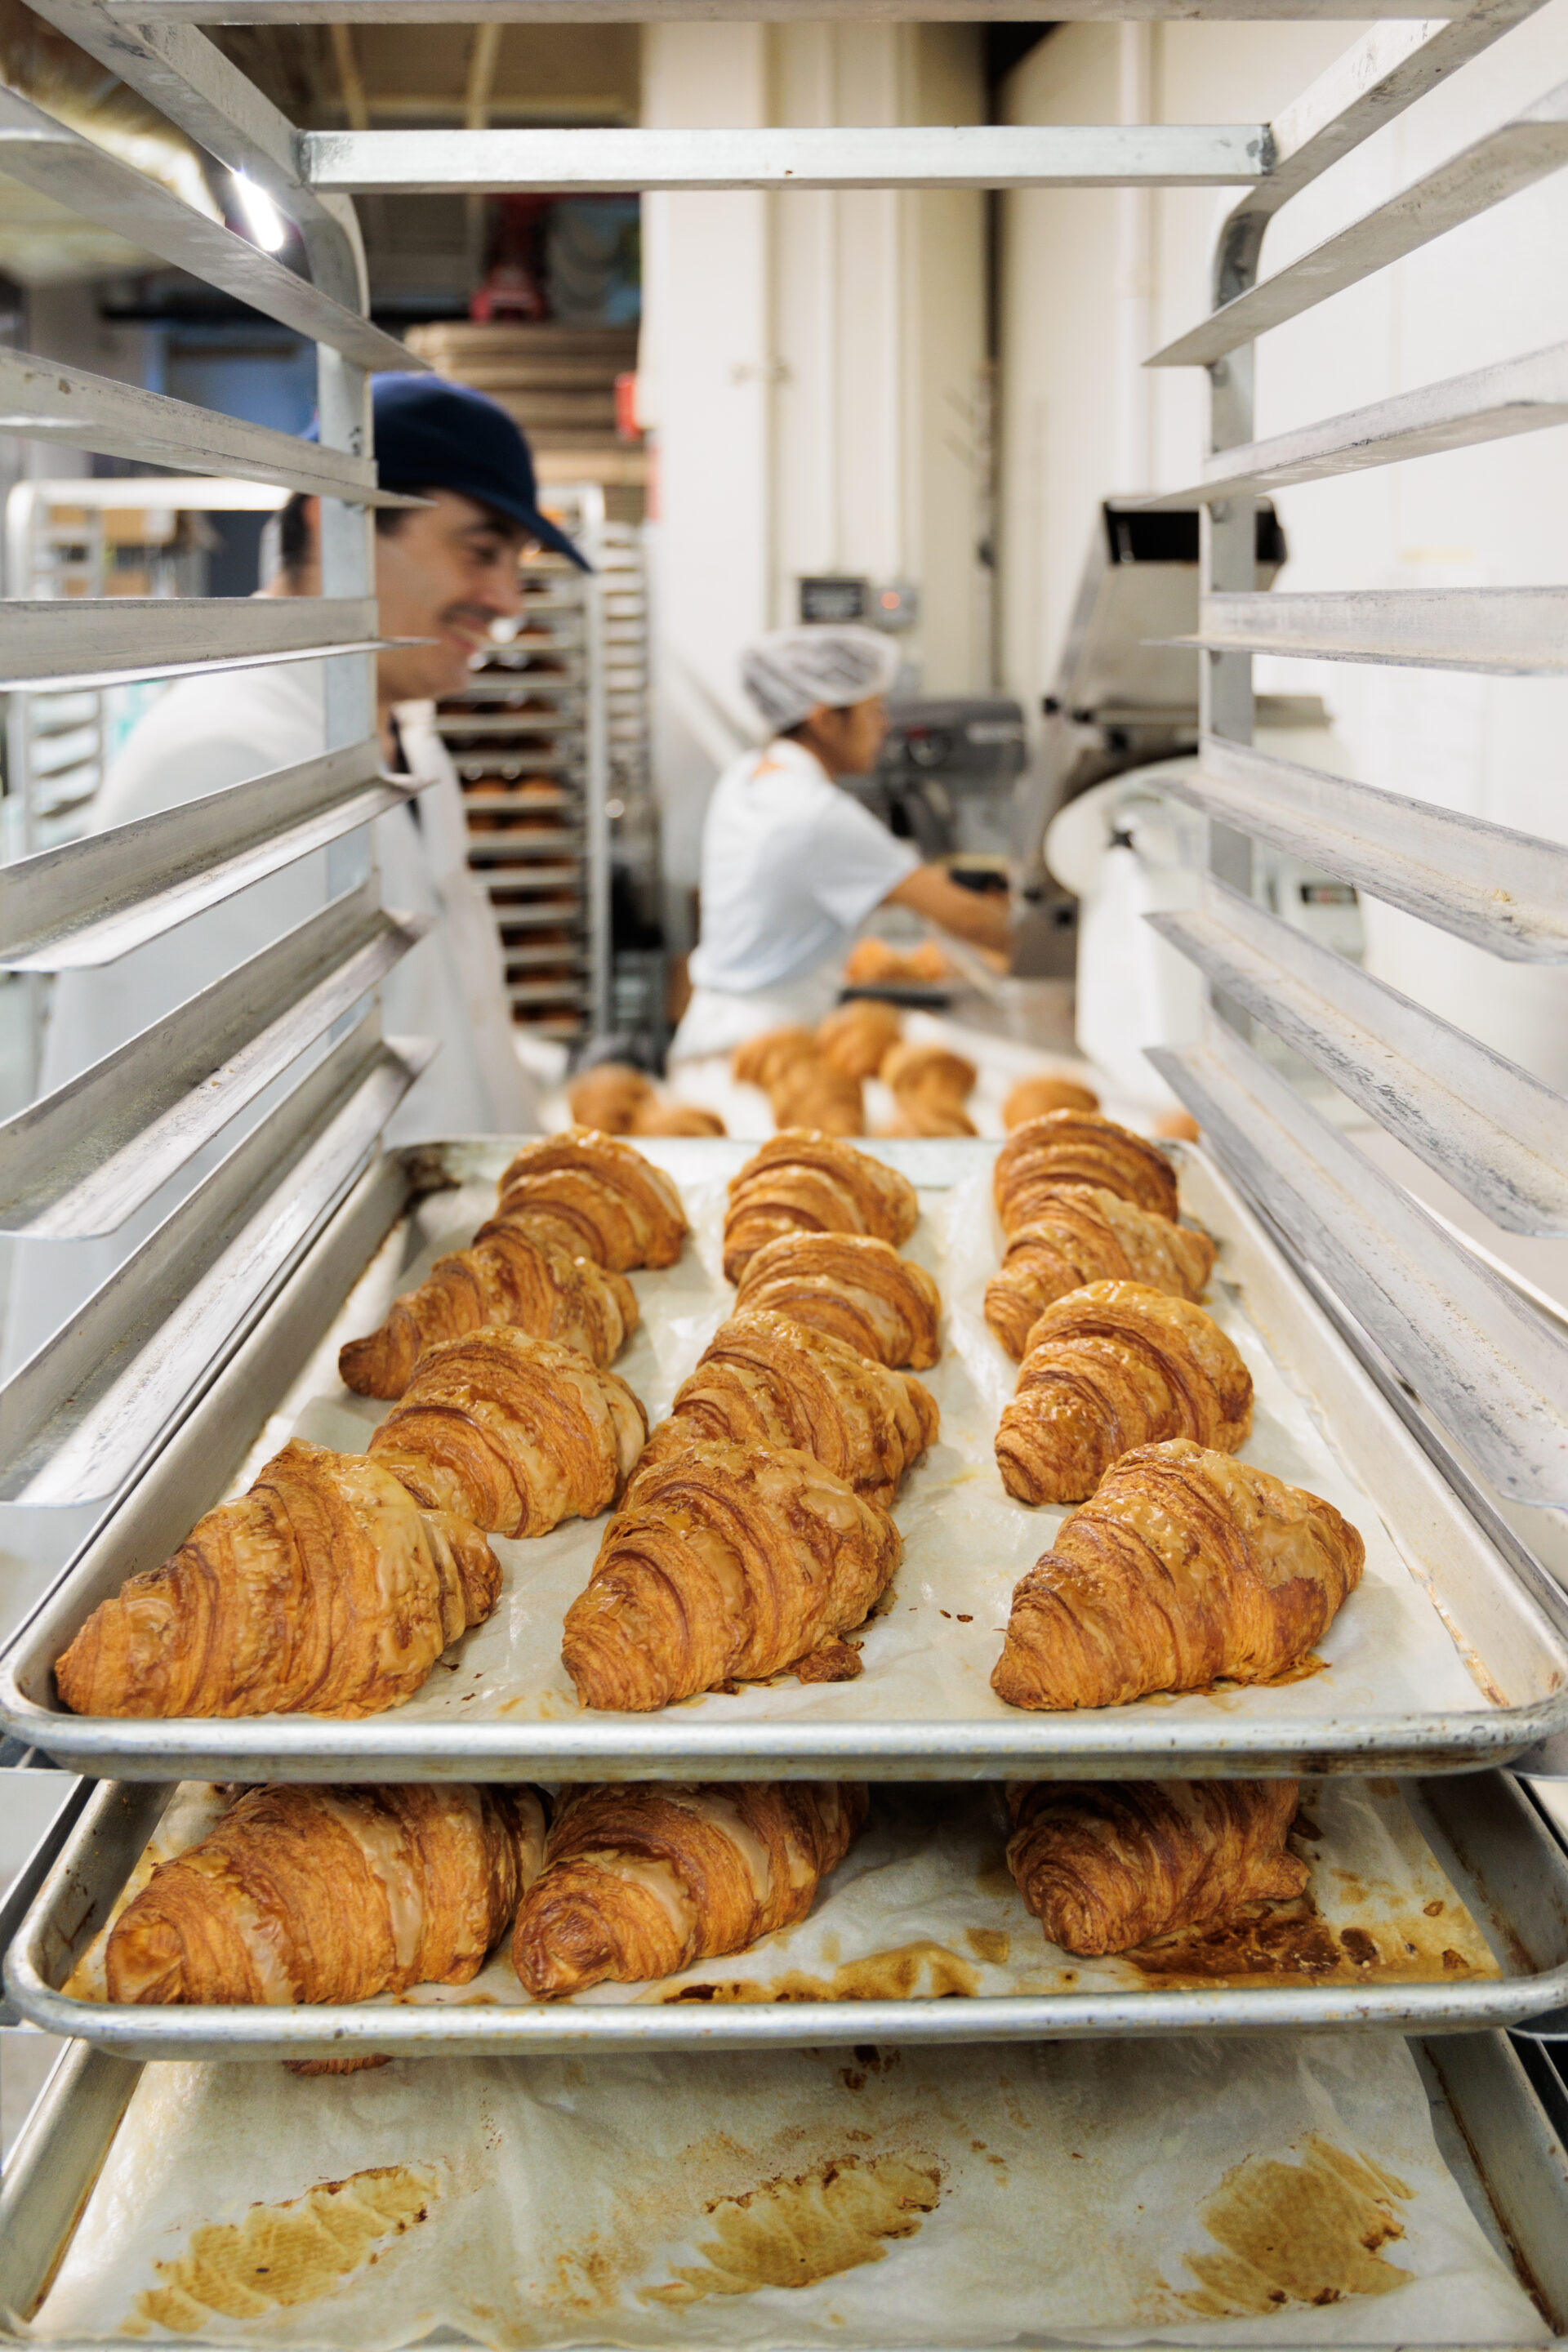 Someone is baking croissants at a bakery.